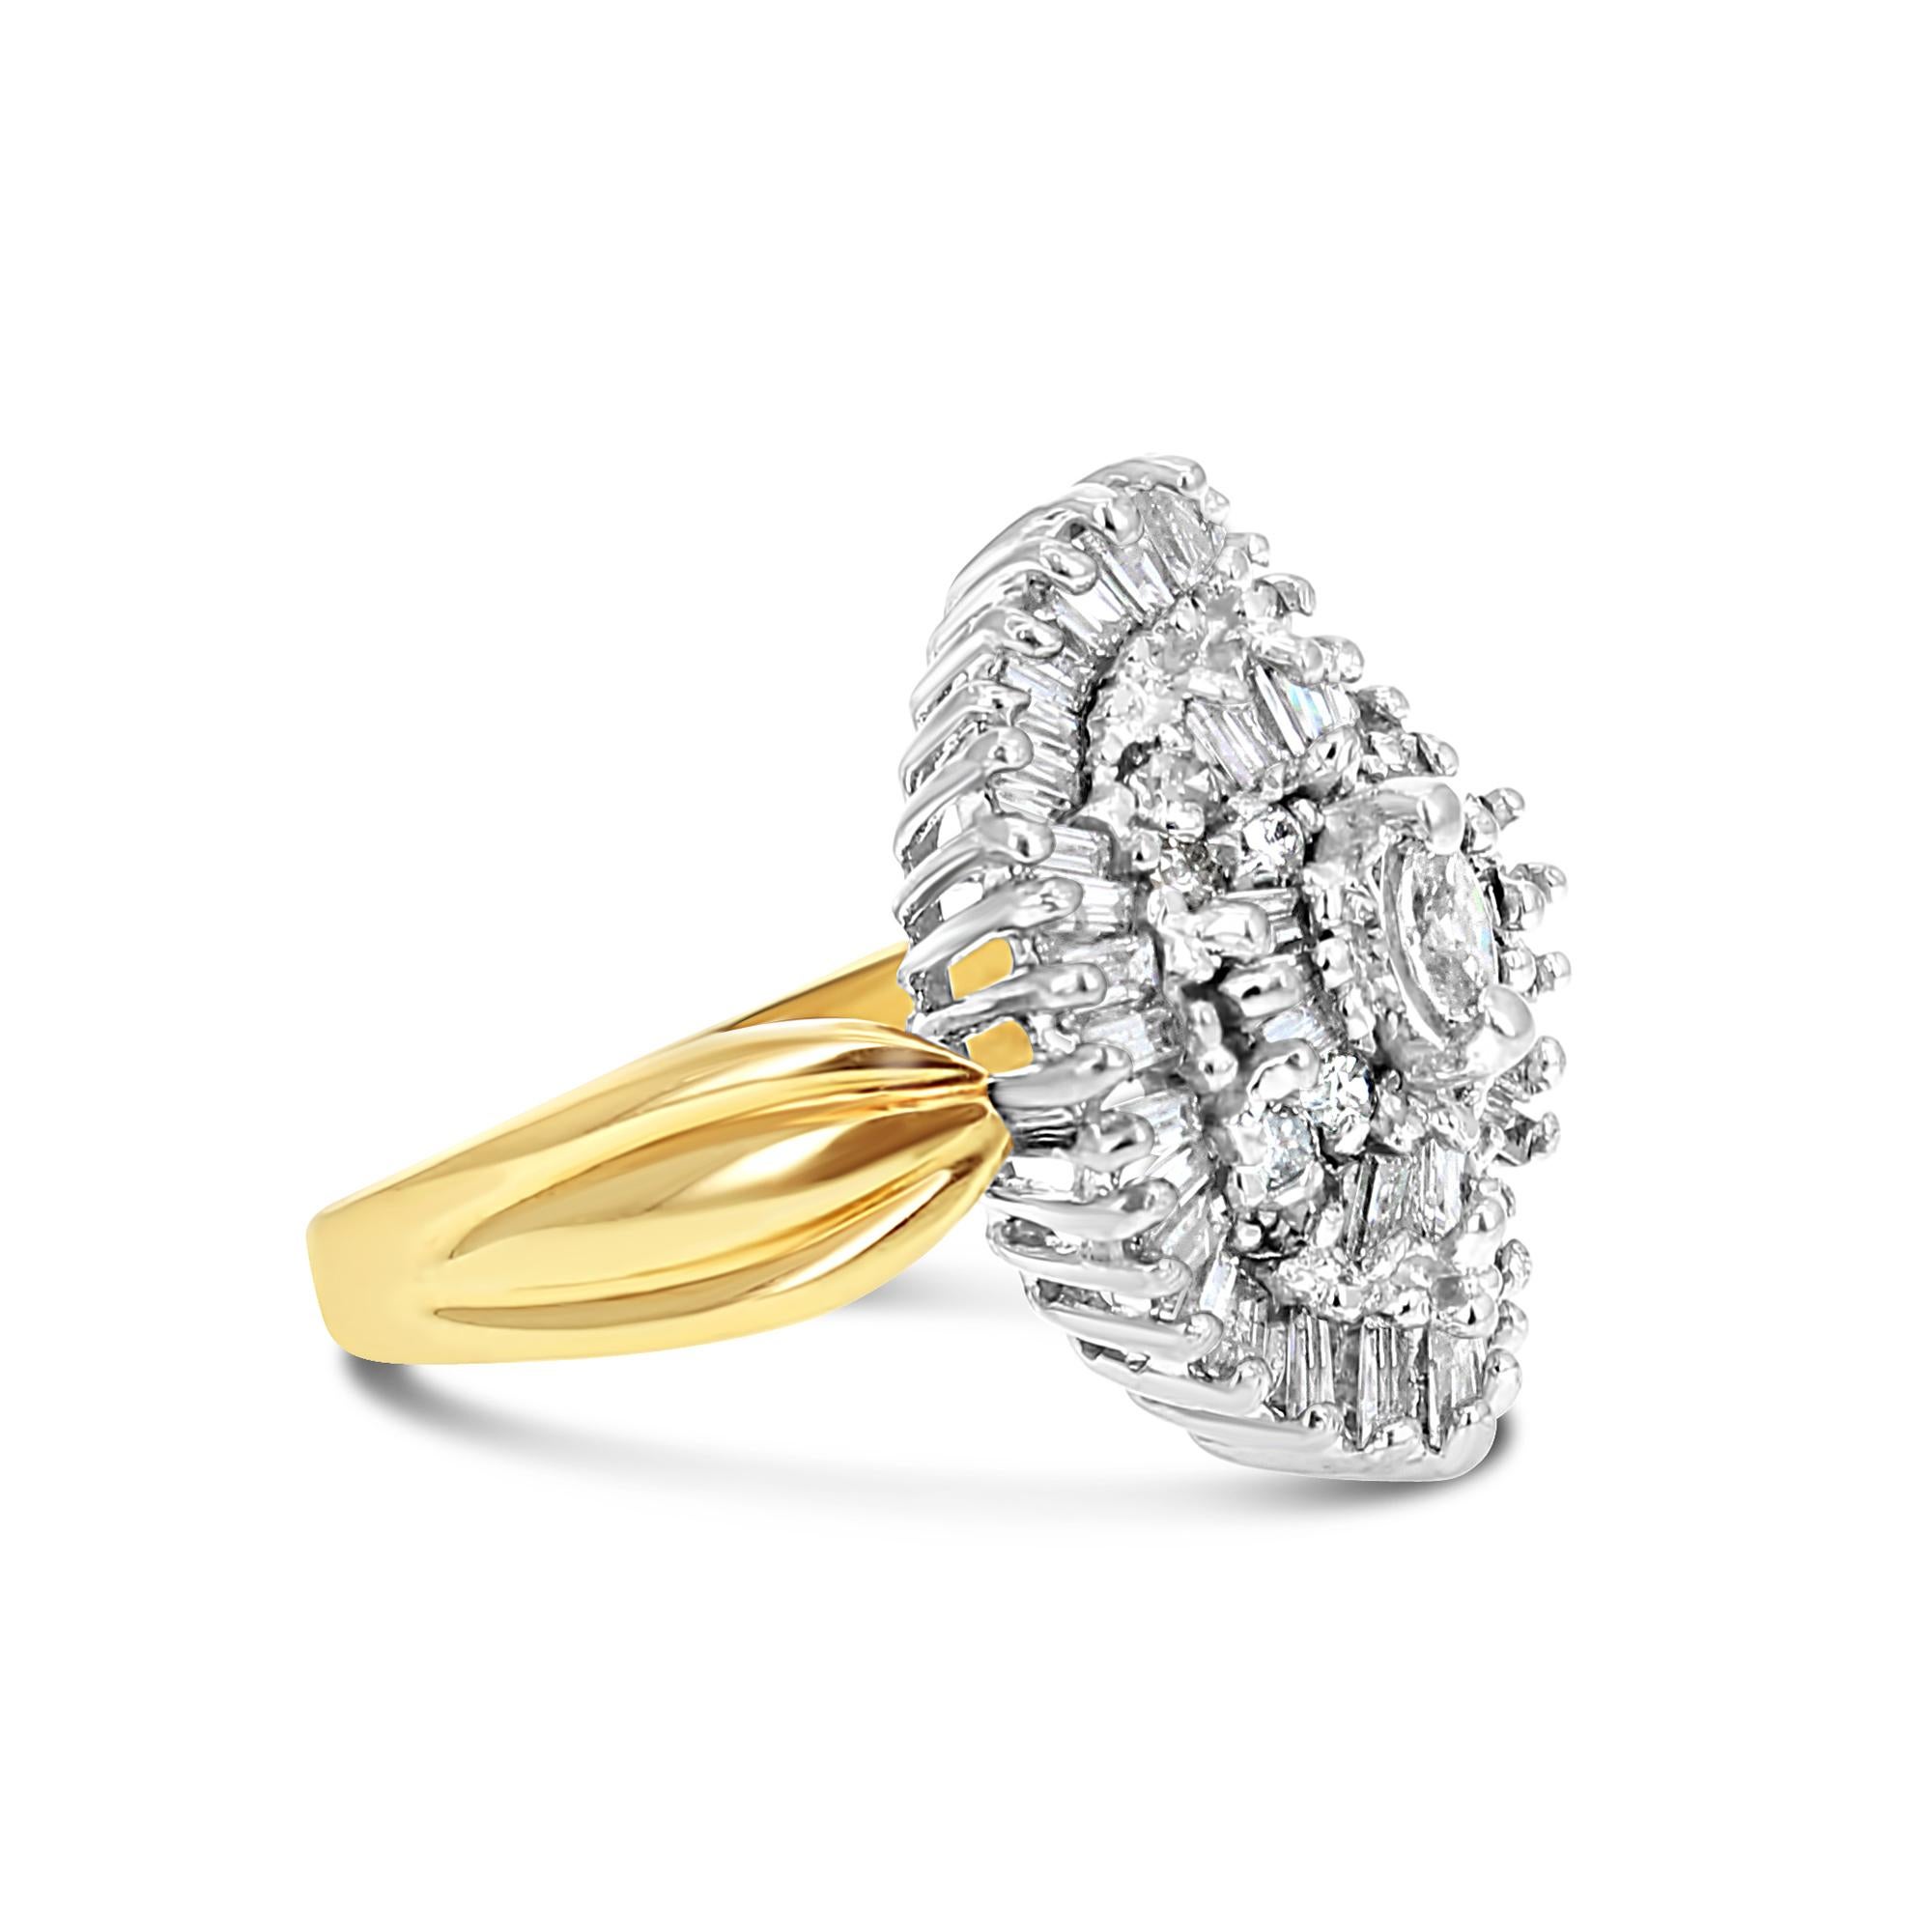 ♥ Product Summary ♥

Main Stone: Diamond
Approx. Diamond Carat Weight: 1.00cttw
Diamond Clarity: SI2/SI3
Diamond Color: I
Diamond Cut: Marquise, Tapered Baguette & Round
Total Amount of Stones: 57
Band Material: 14k Yellow Gold